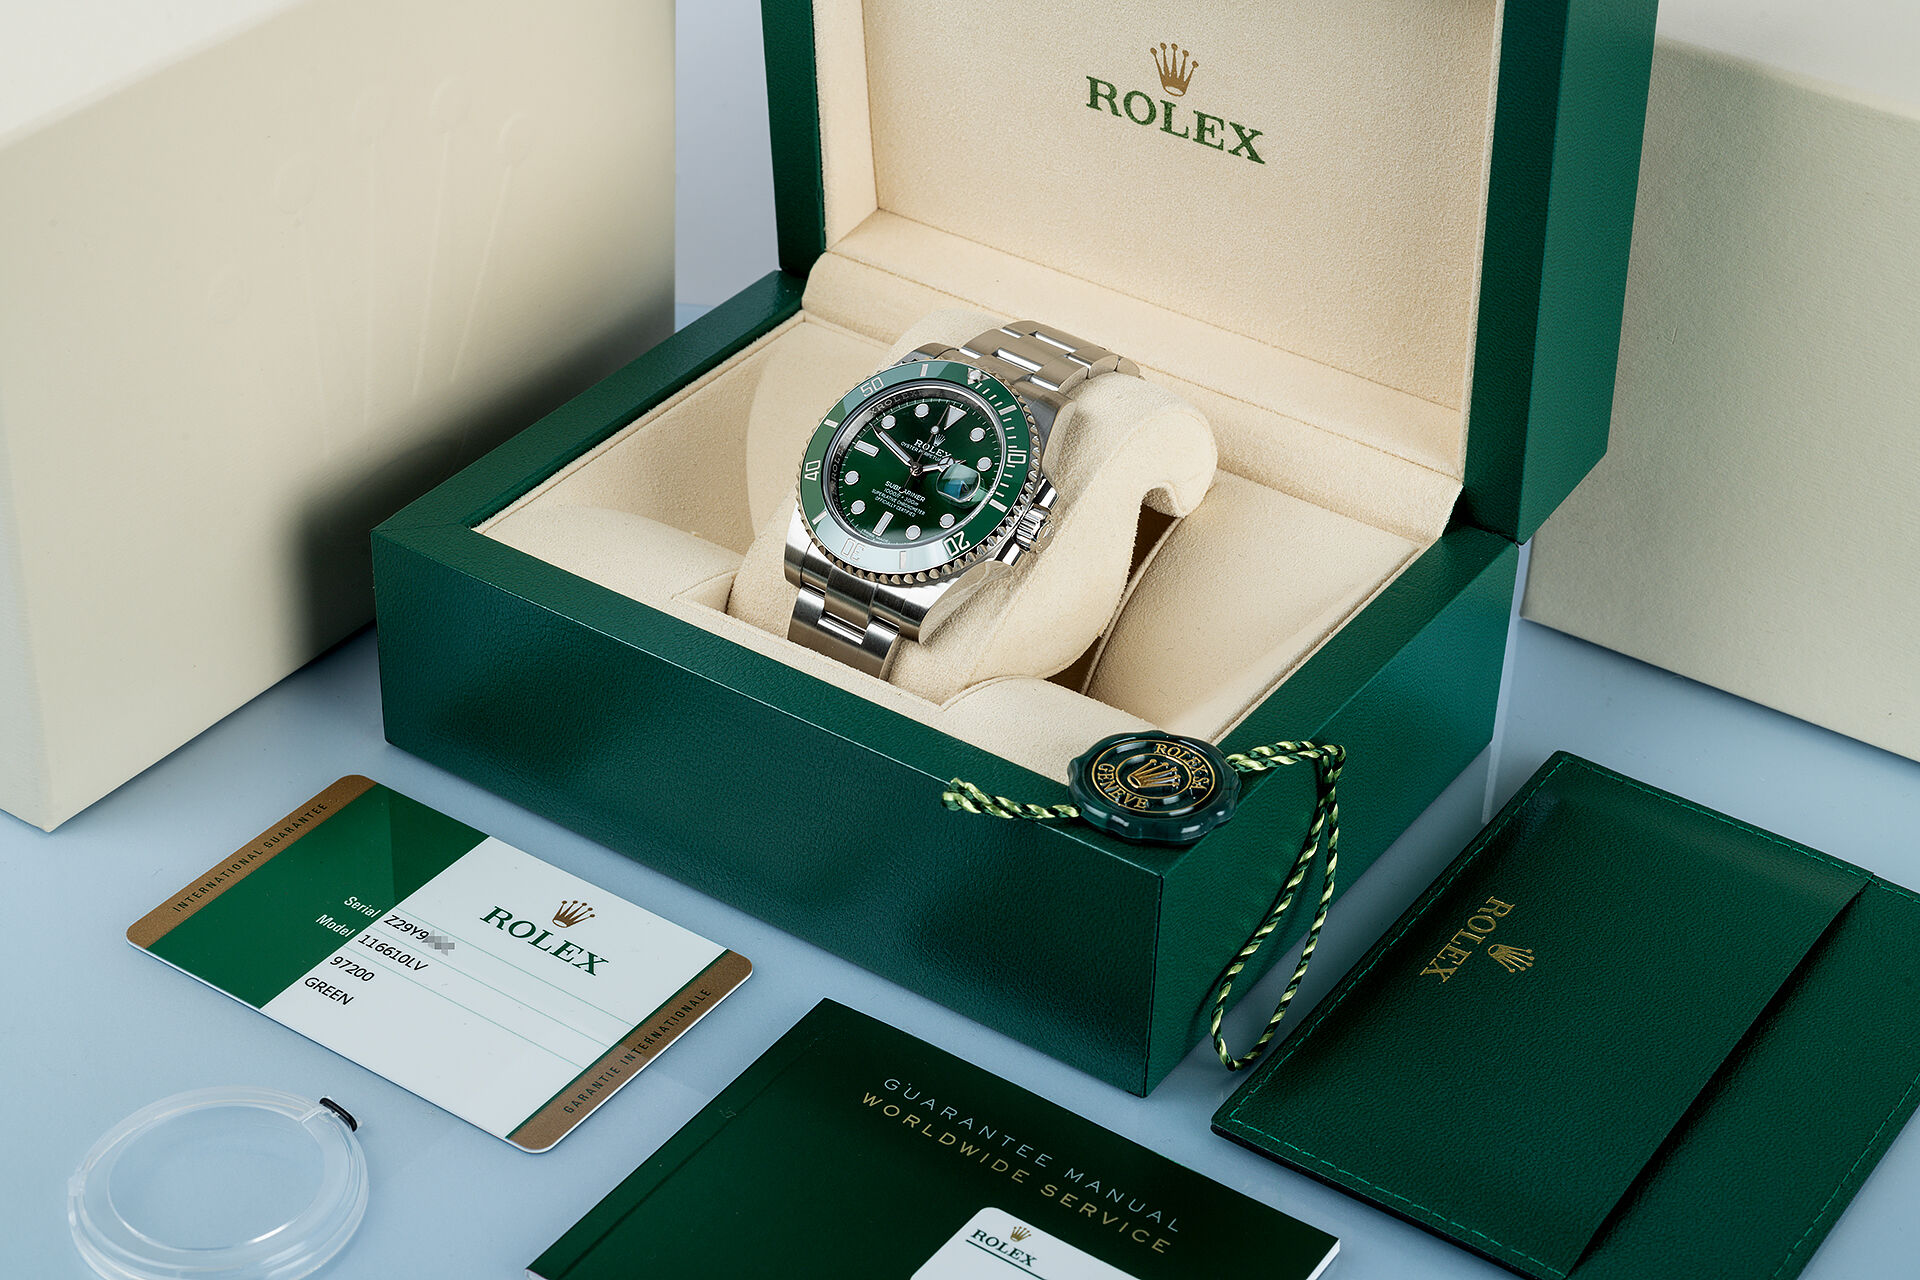 ref 116610LV | Box & Papers | Rolex Submariner Date